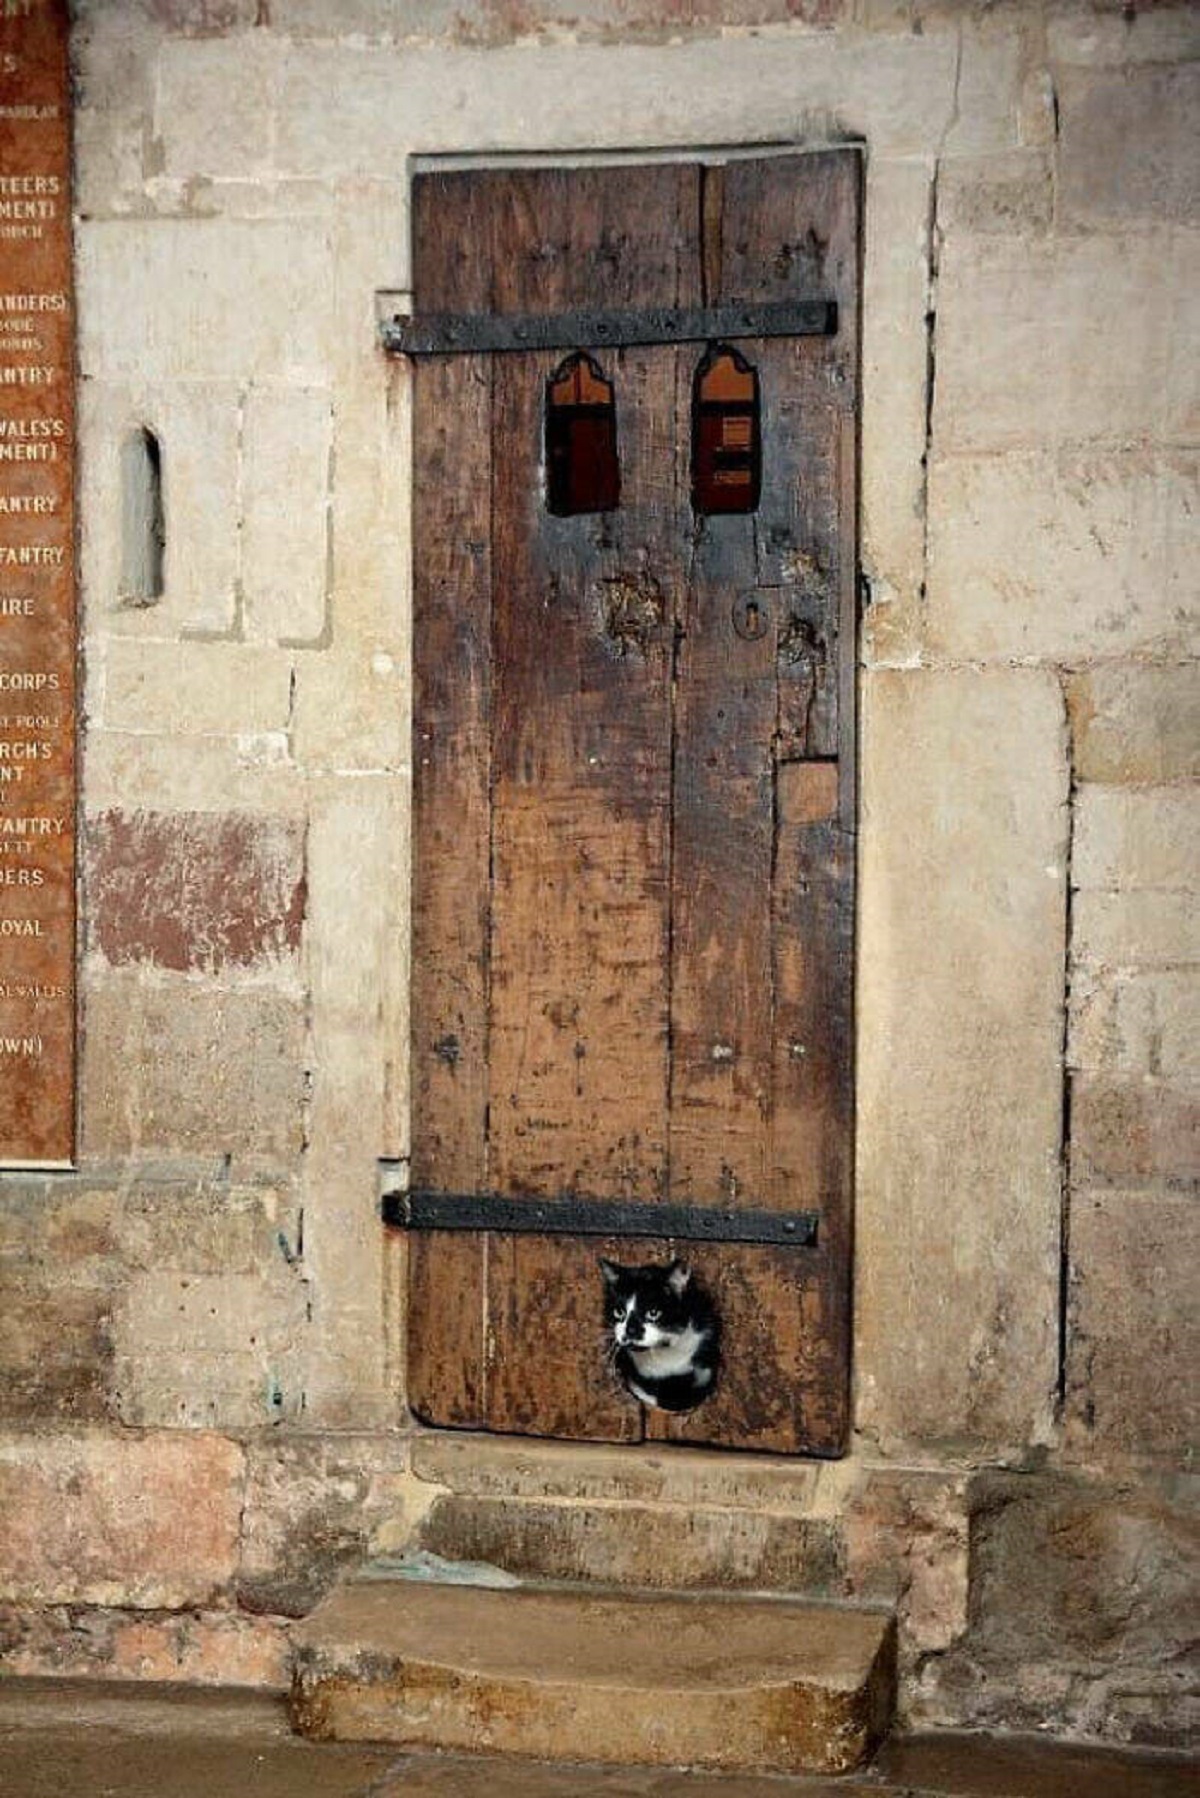 "This 14th Century Door At Exeter Cathedral, UK, Is Thought To Be The Oldest Existing Cat Flap"